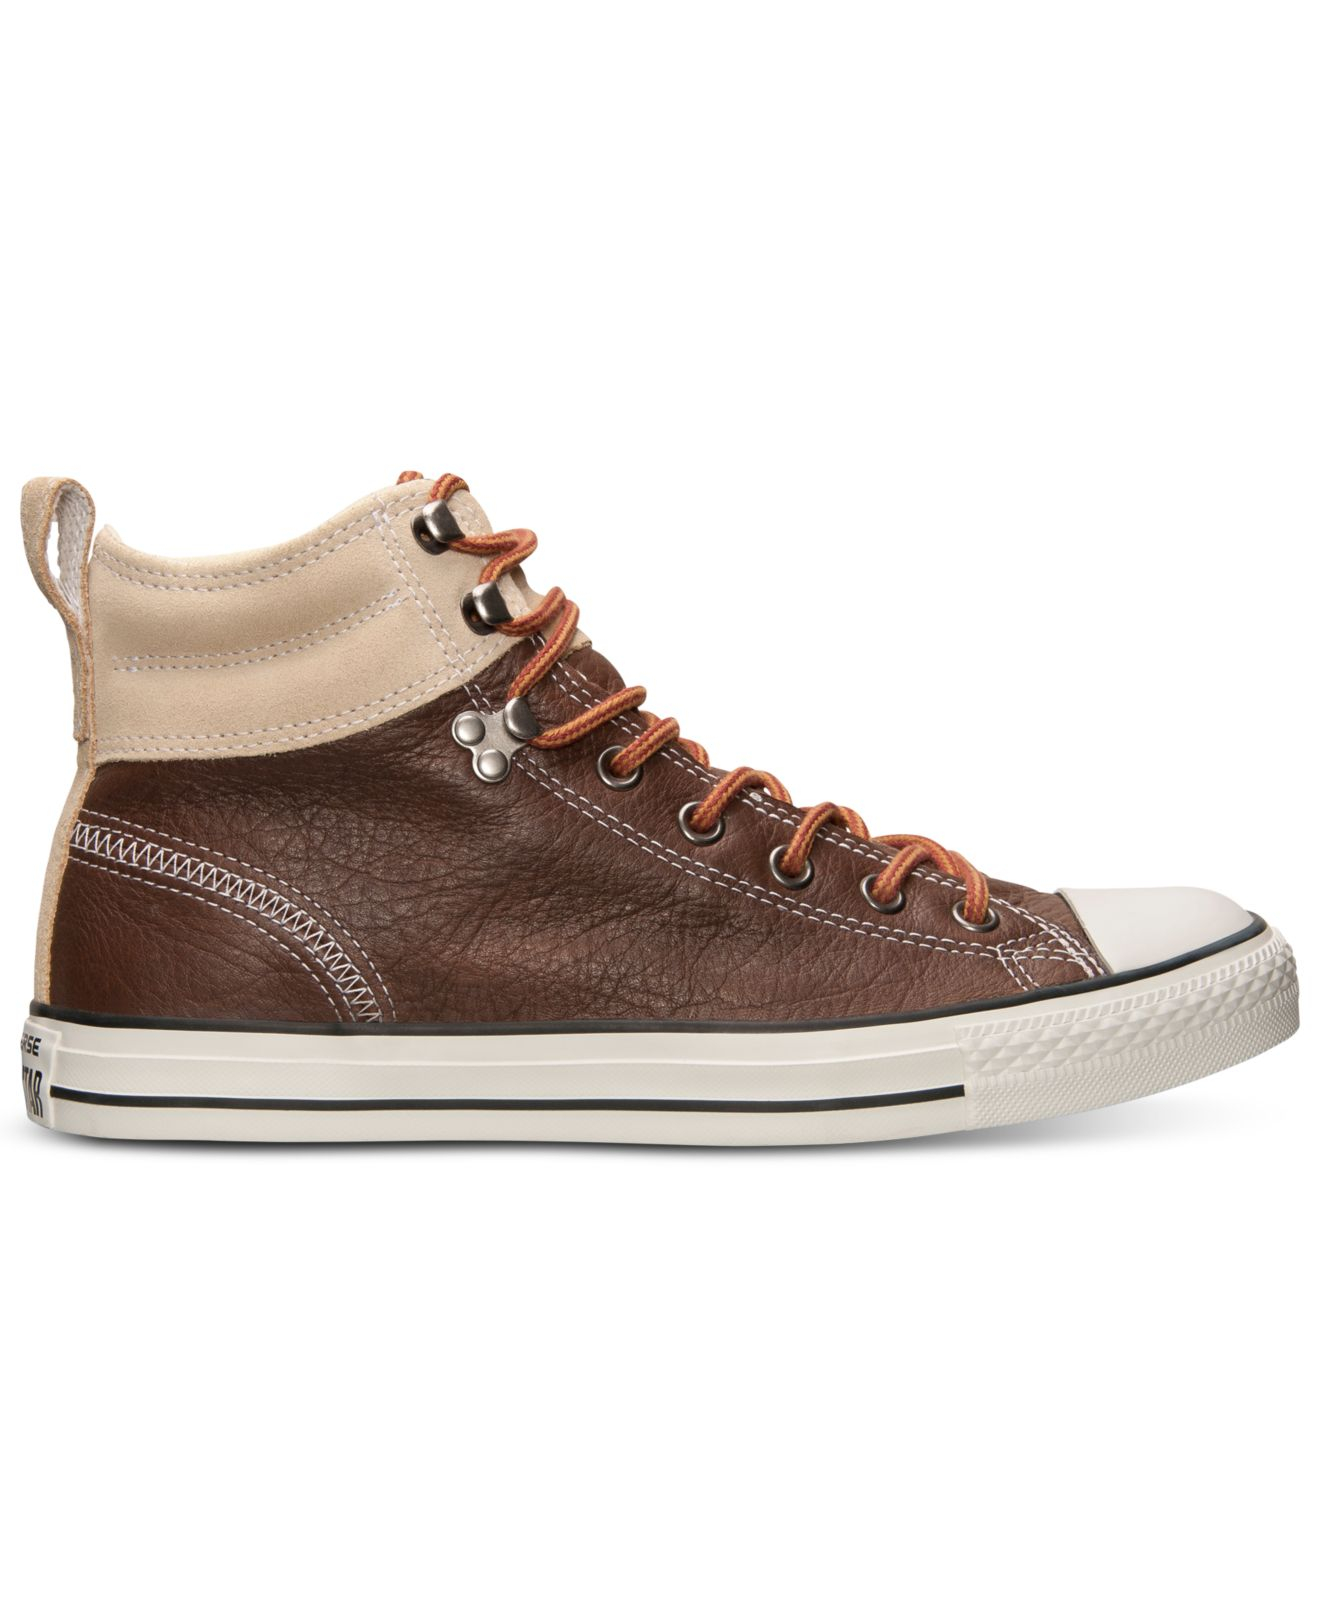 Lyst - Converse Men's Chuck Taylor All Star Hiker 2 Sneakers From ...